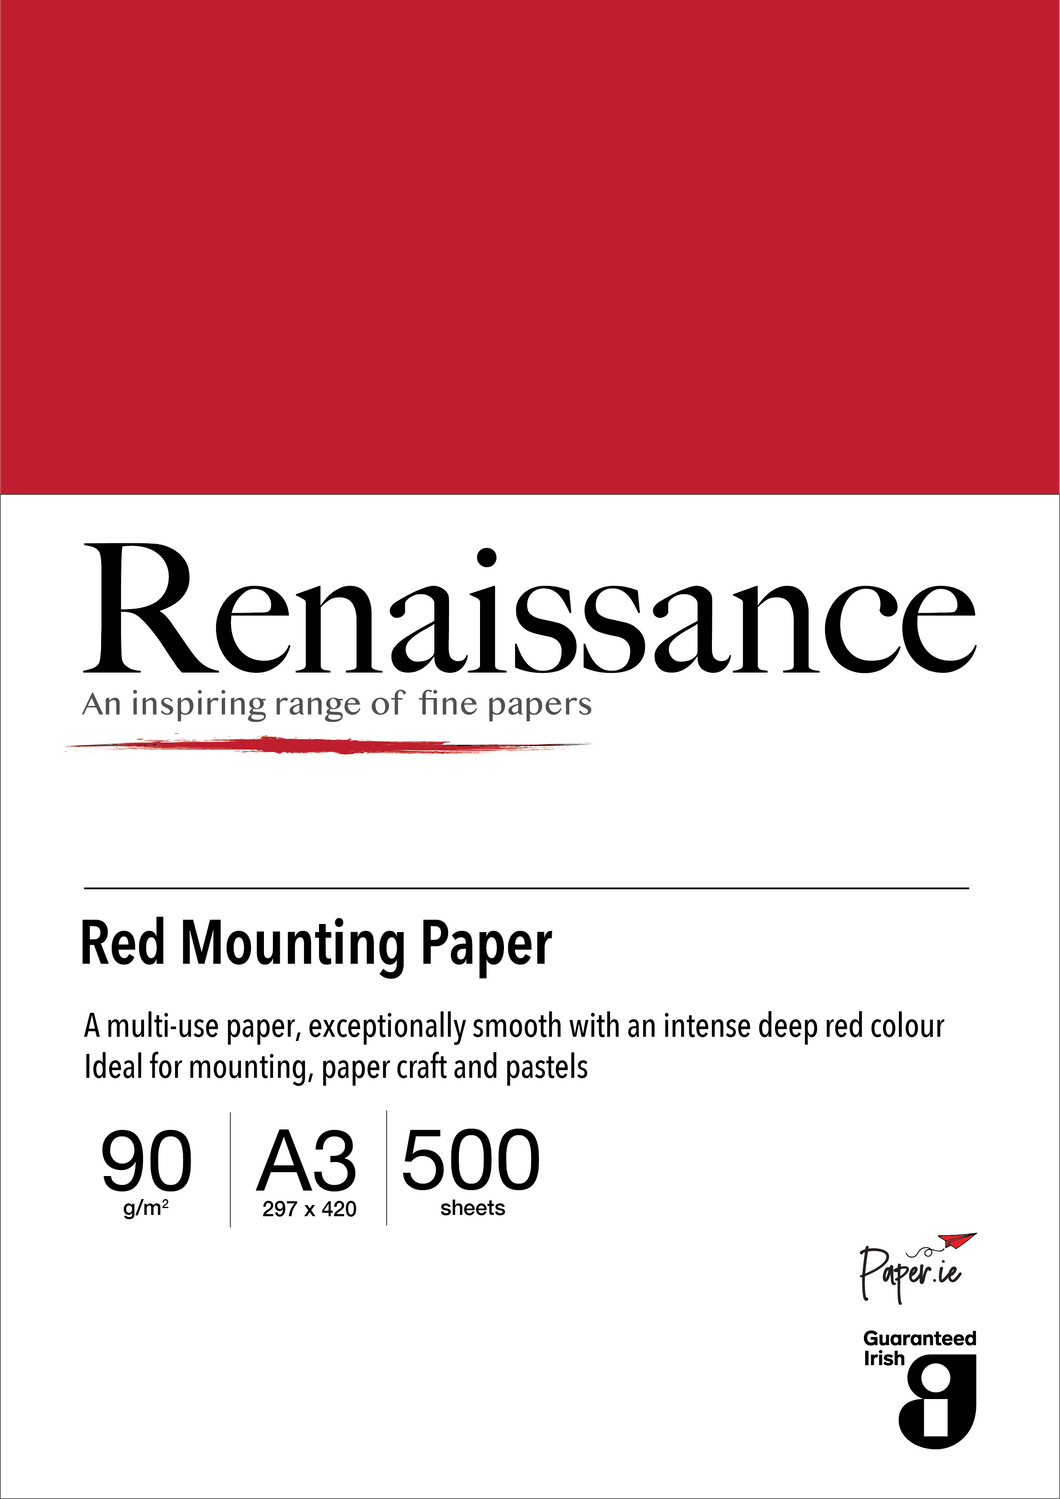 Red Mounting Paper